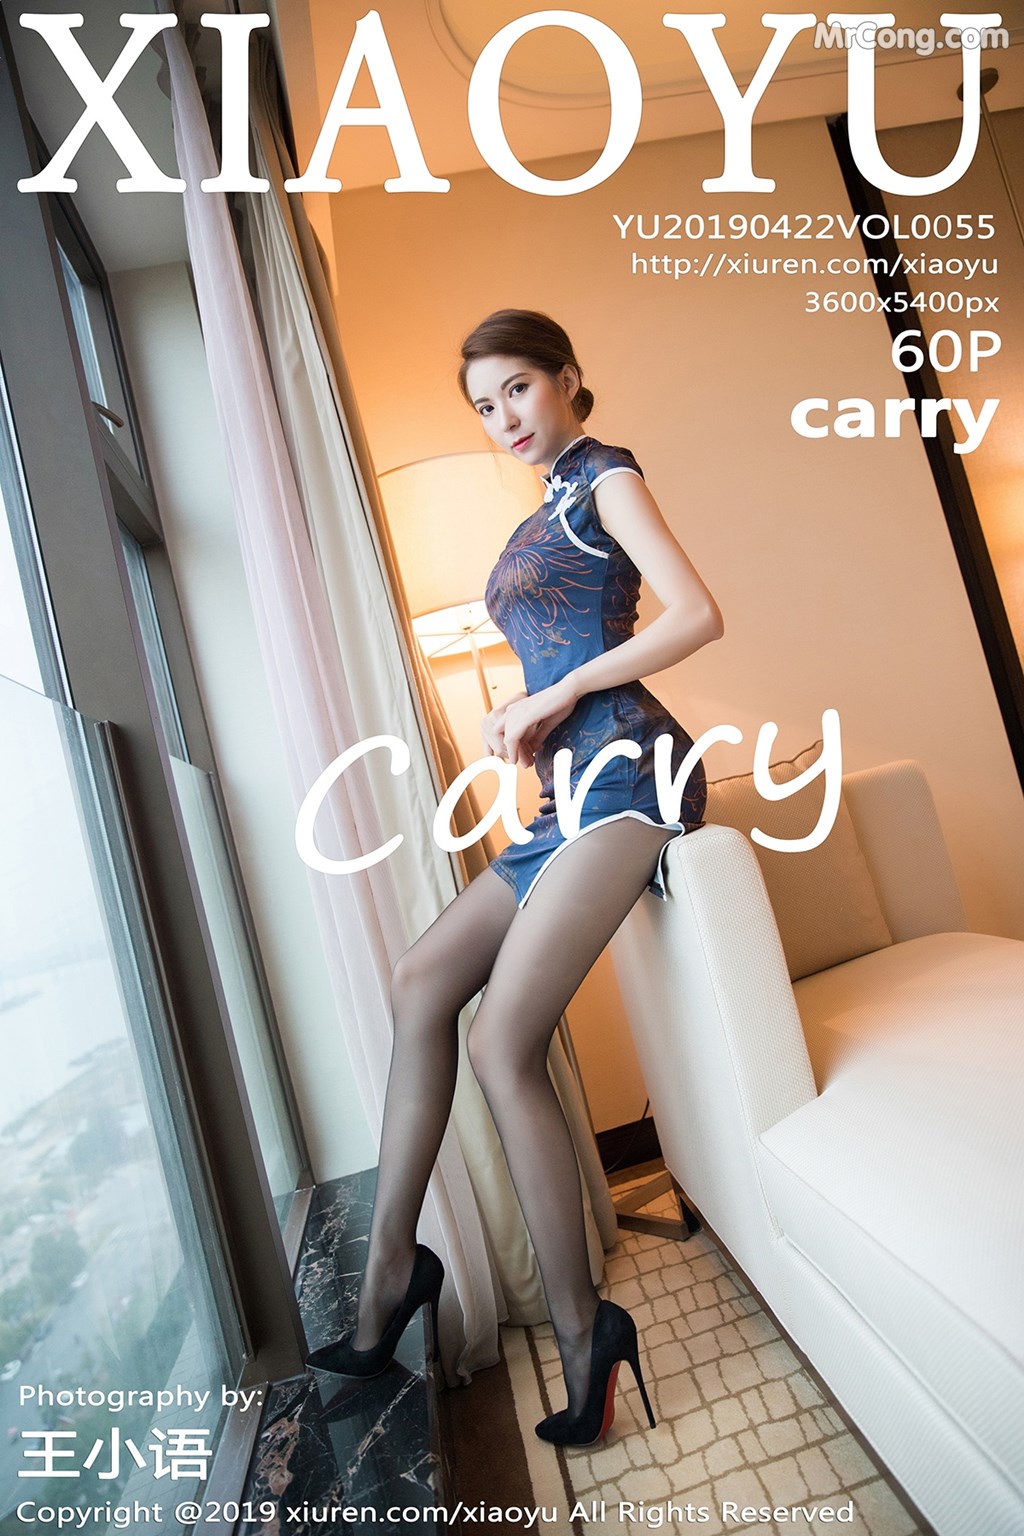 XiaoYu Vol.055: carry (61 pictures)